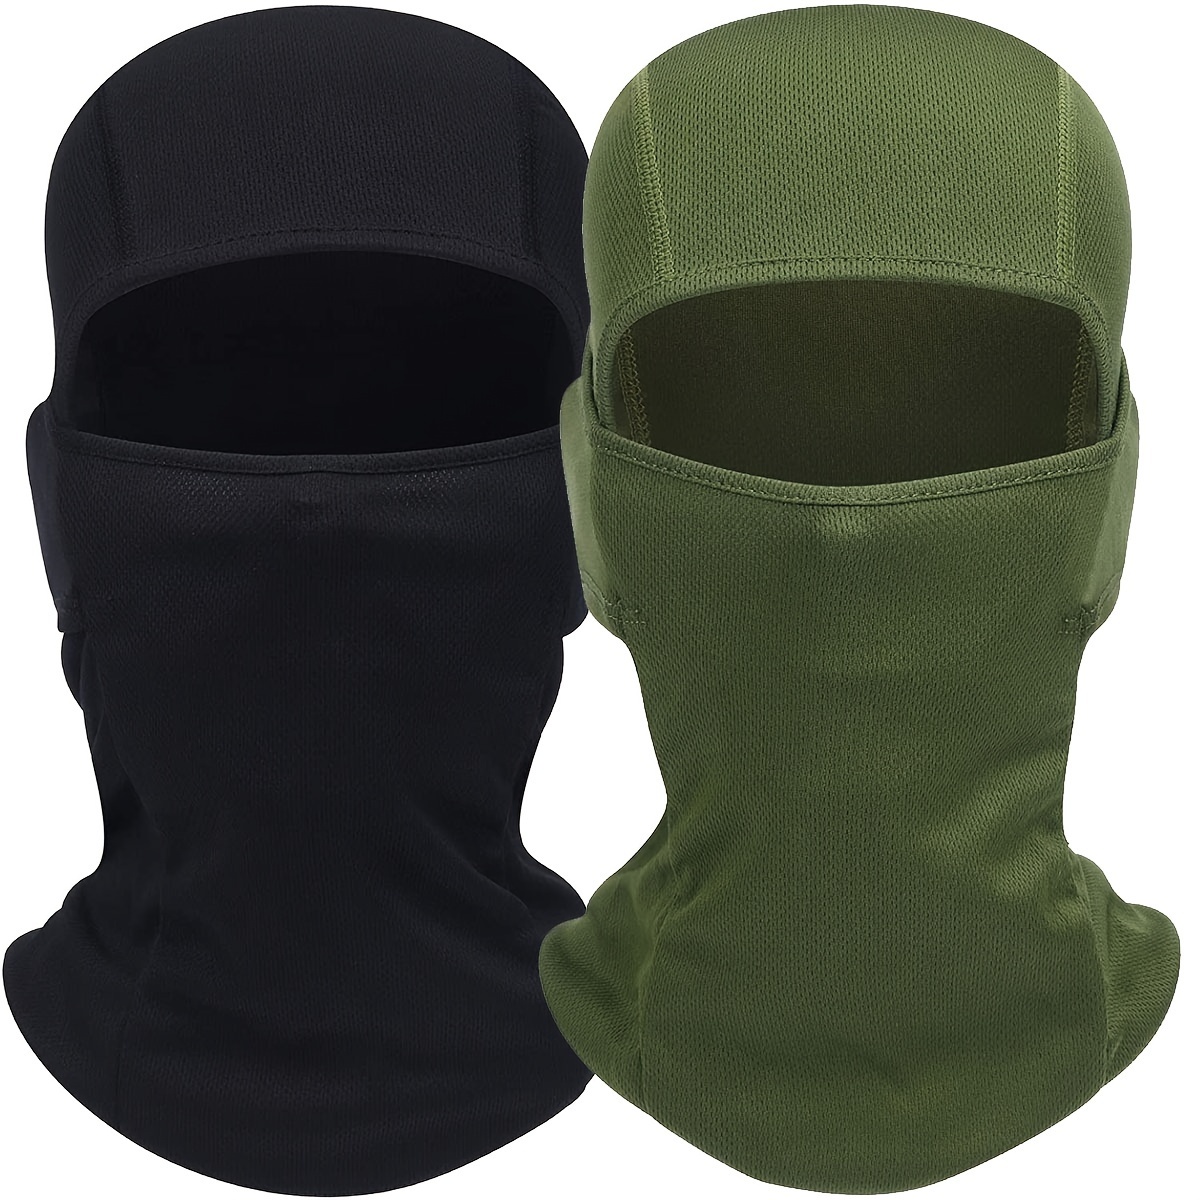 

2pcs Full Face Mask Hats For Men Women Balaclava Hood Helmet Liner Uv Protector Lightweight For Motorcycle Cycling Fishing Snowboard